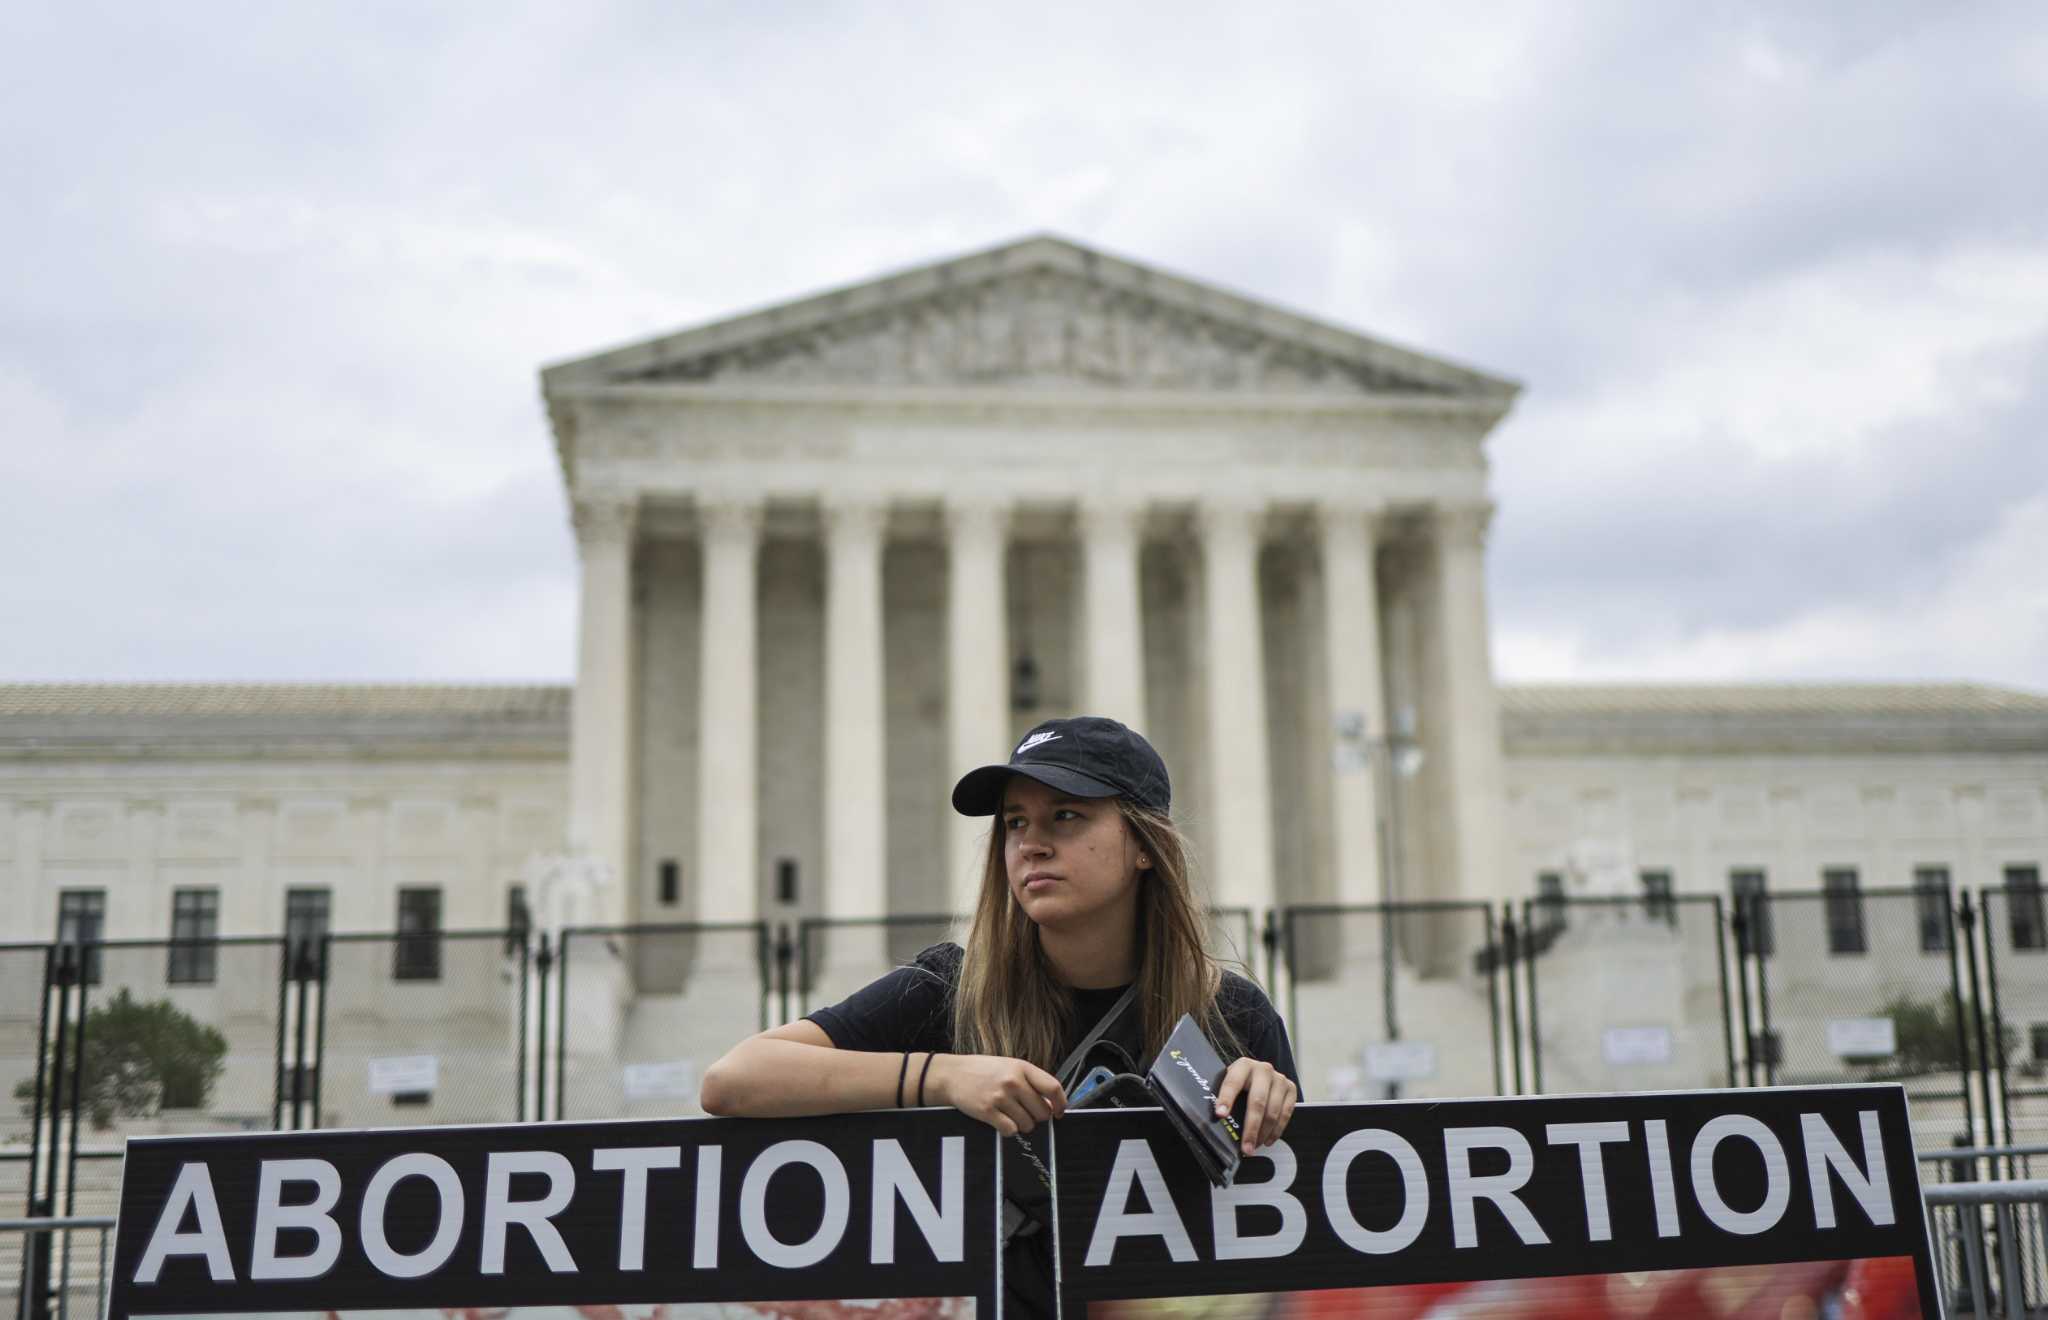 People seeking abortions in CT could face charges in their home states